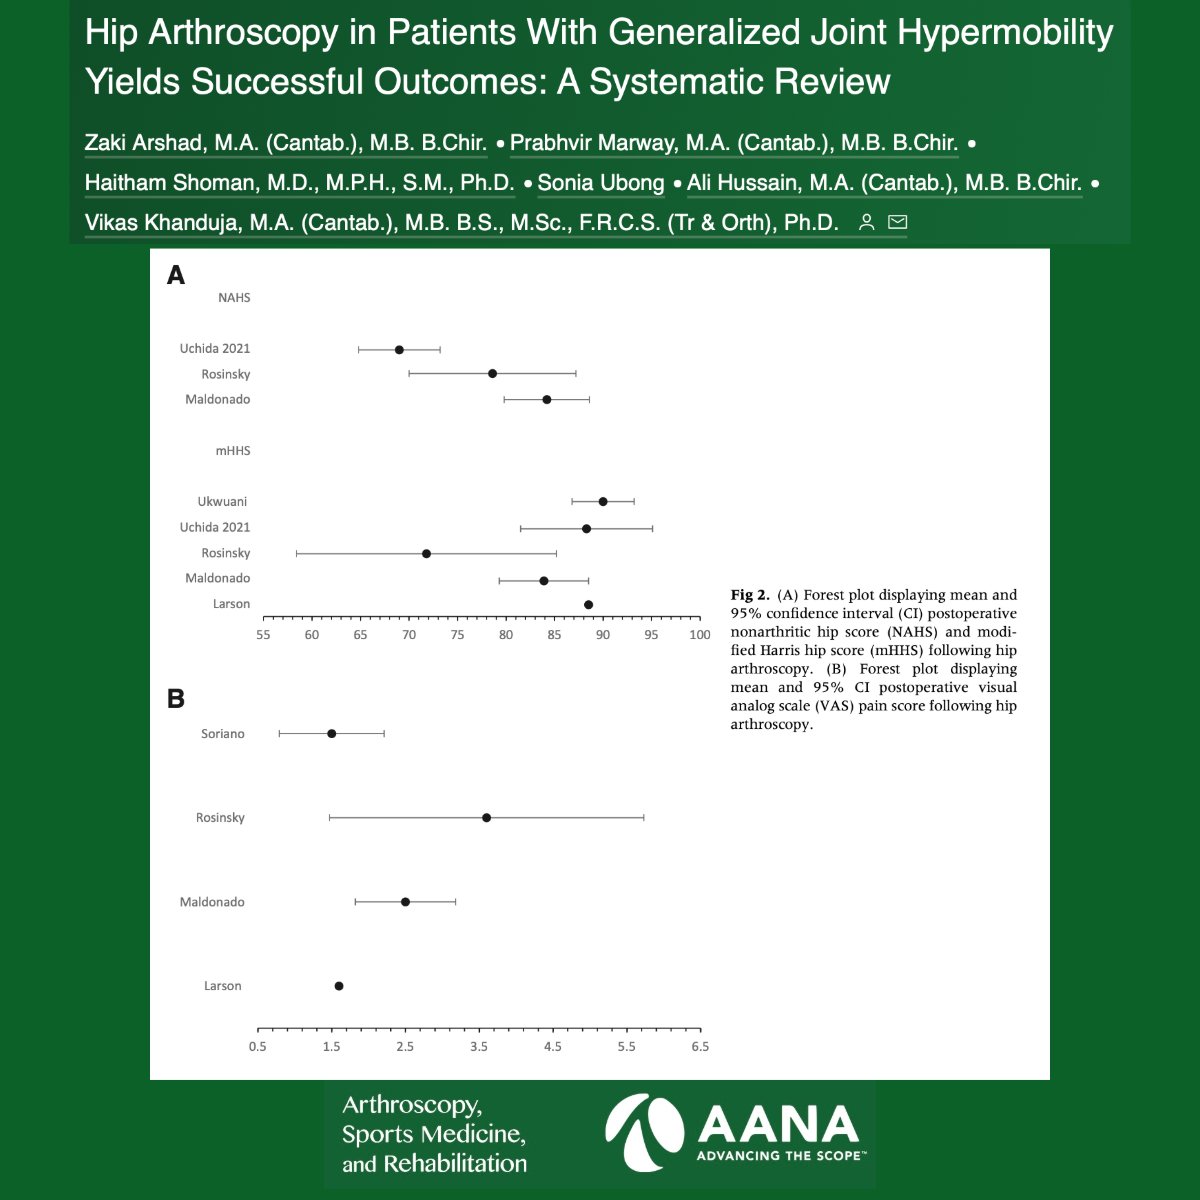 Patients with generalized joint hypermobility may achieve good outcomes following hip arthroscopy with respect to patient-reported outcome measures, perioperative complications, reoperation, and return to sport. #JointHypermobility #HipArthroscopy #PatientOutcomes